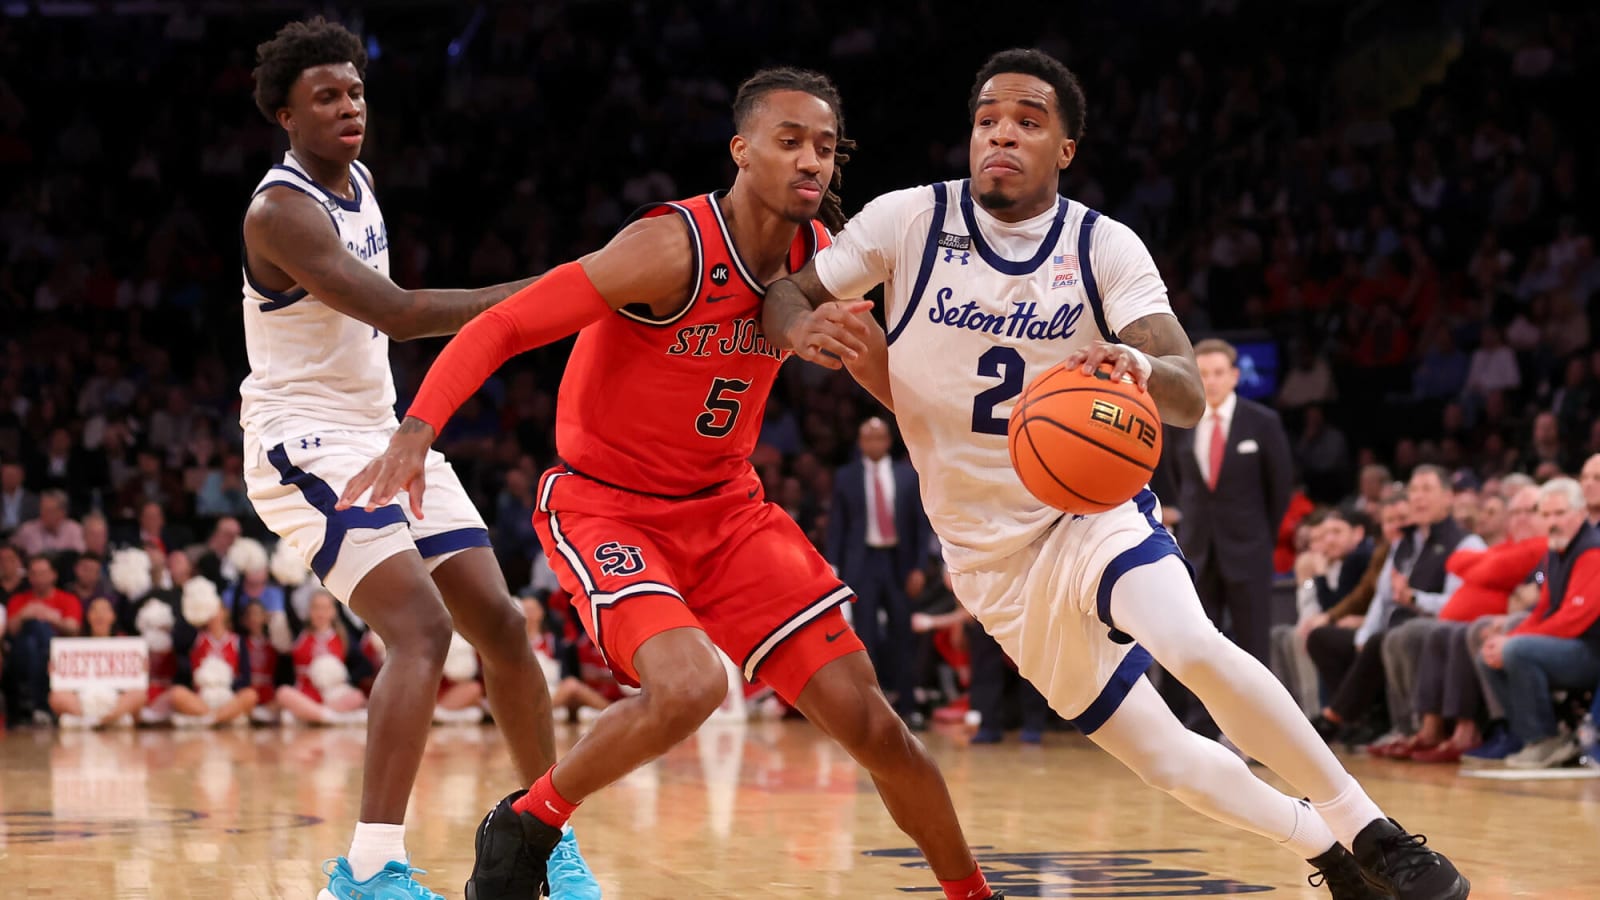 Rebels Season Comes to a End with 91-68 to Seton Hall